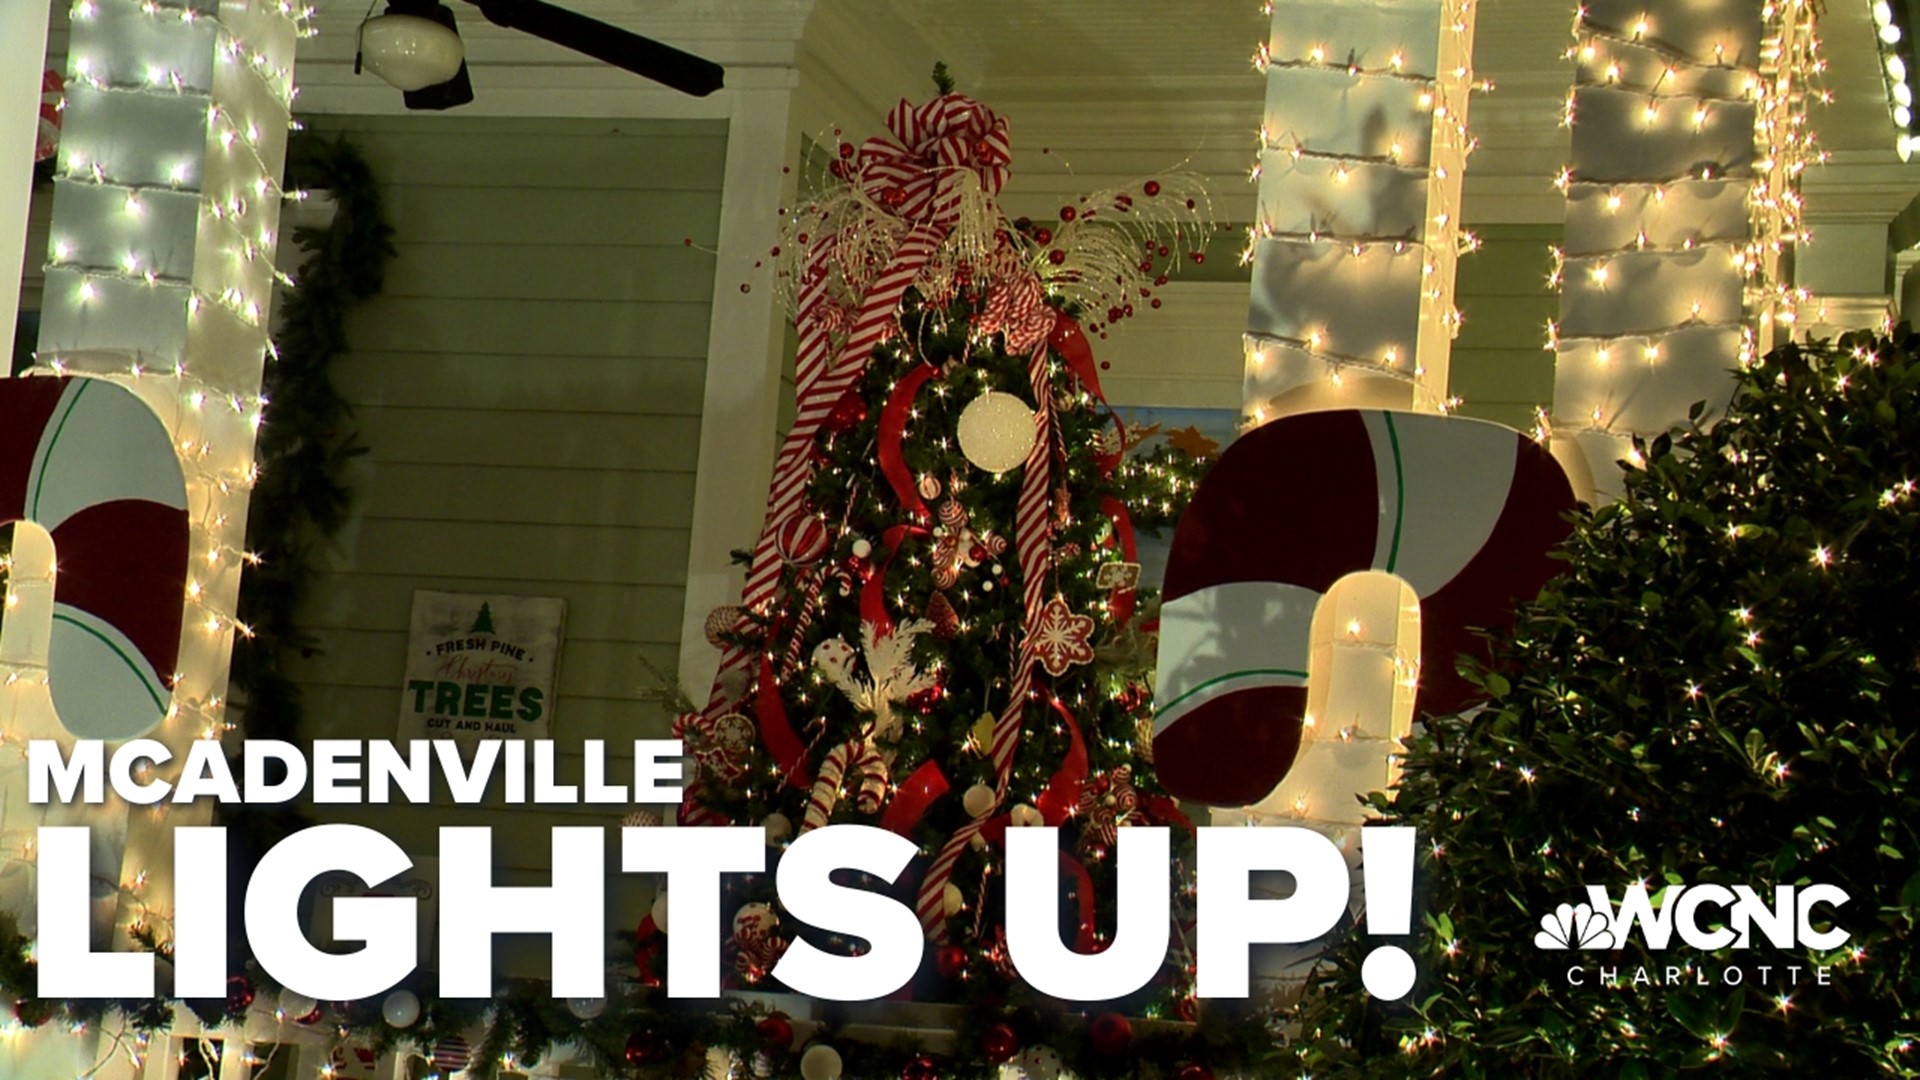 Christmas Town USA is officially open tonight and welcoming travelers from all over!